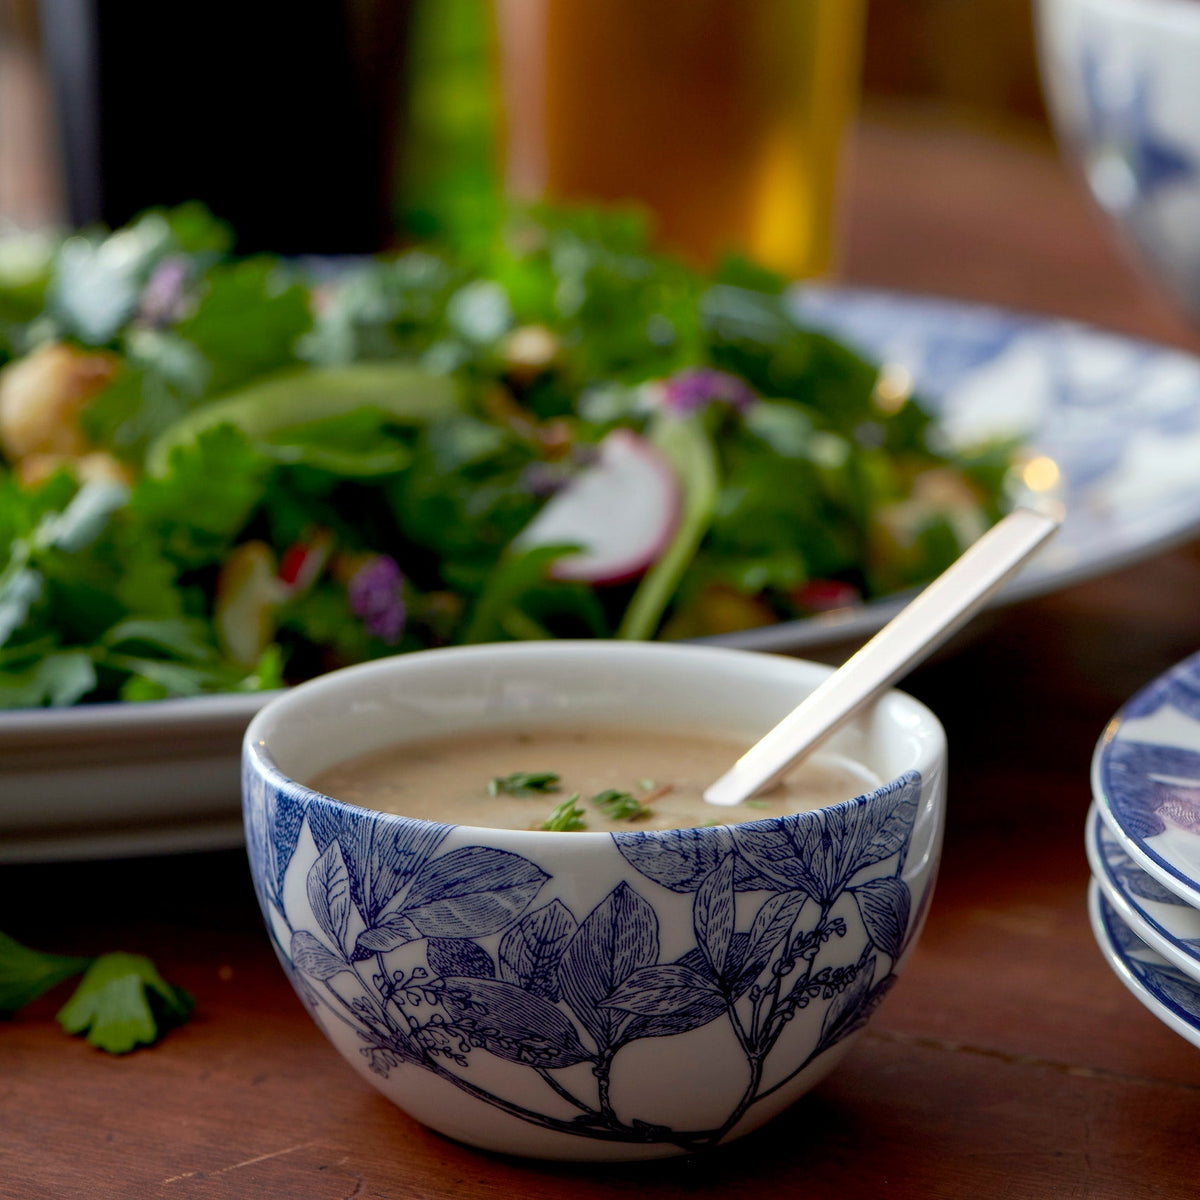 A dishwasher and microwave safe ceramic bowl with a blue floral pattern contains a spoon resting in a light-colored soup or sauce. In the background, there is a mixed salad with greens and radishes on a white plate. The bowl is an Arbor Snack Bowl from Caskata Artisanal Home.